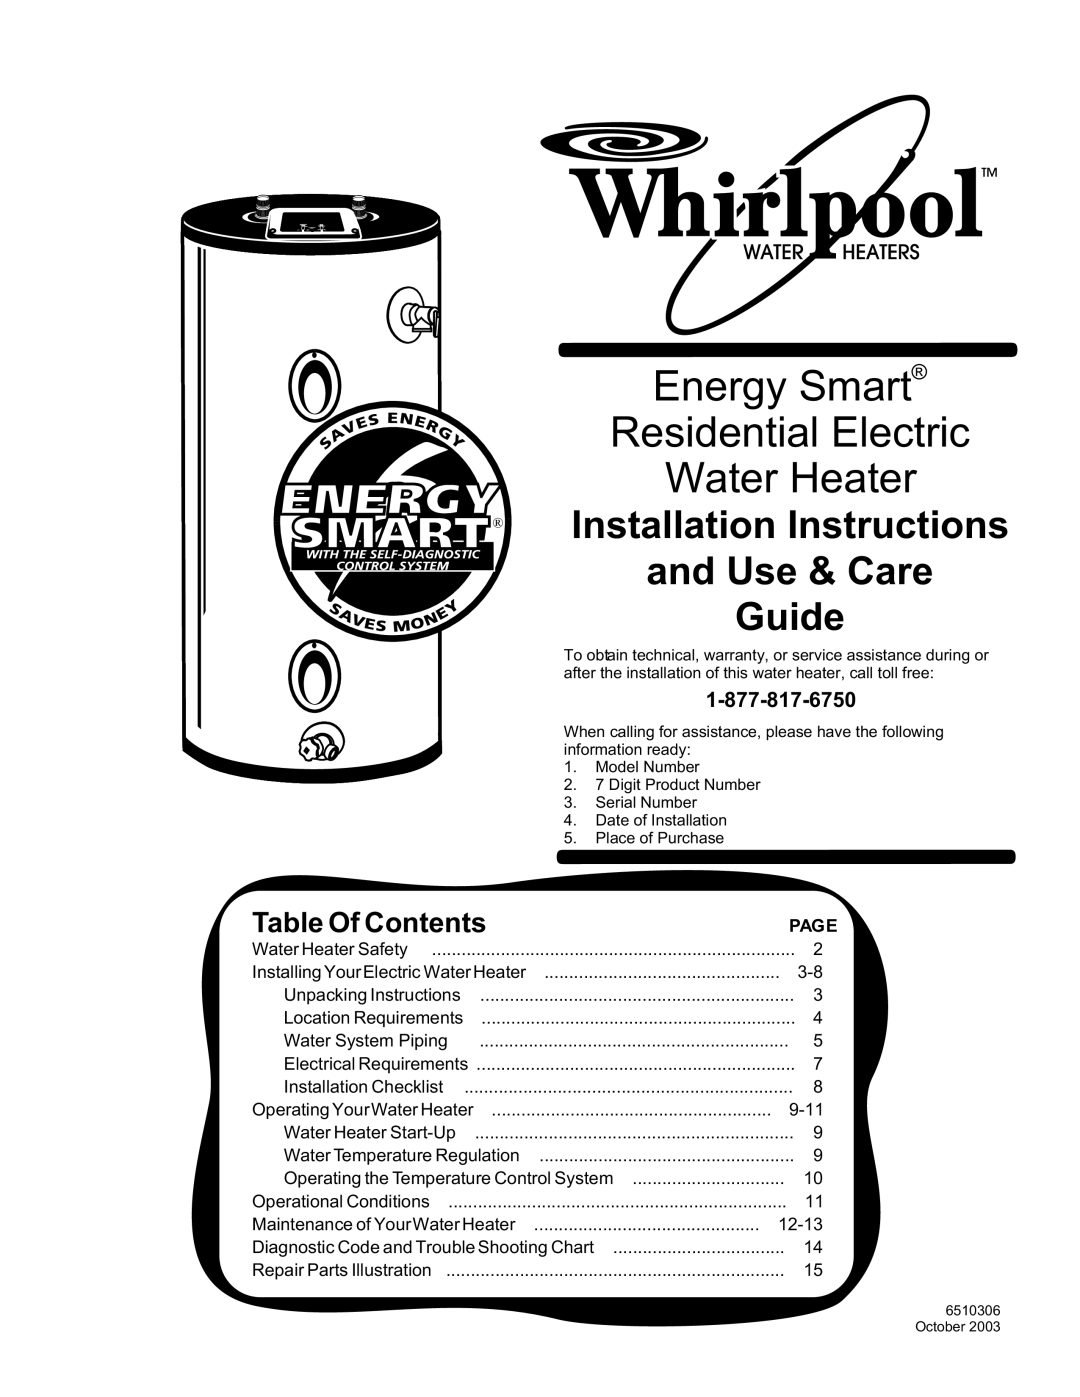 Whirlpool 188413 installation instructions Page, Energy Smart Residential Electric Water Heater, Installation Instructions 